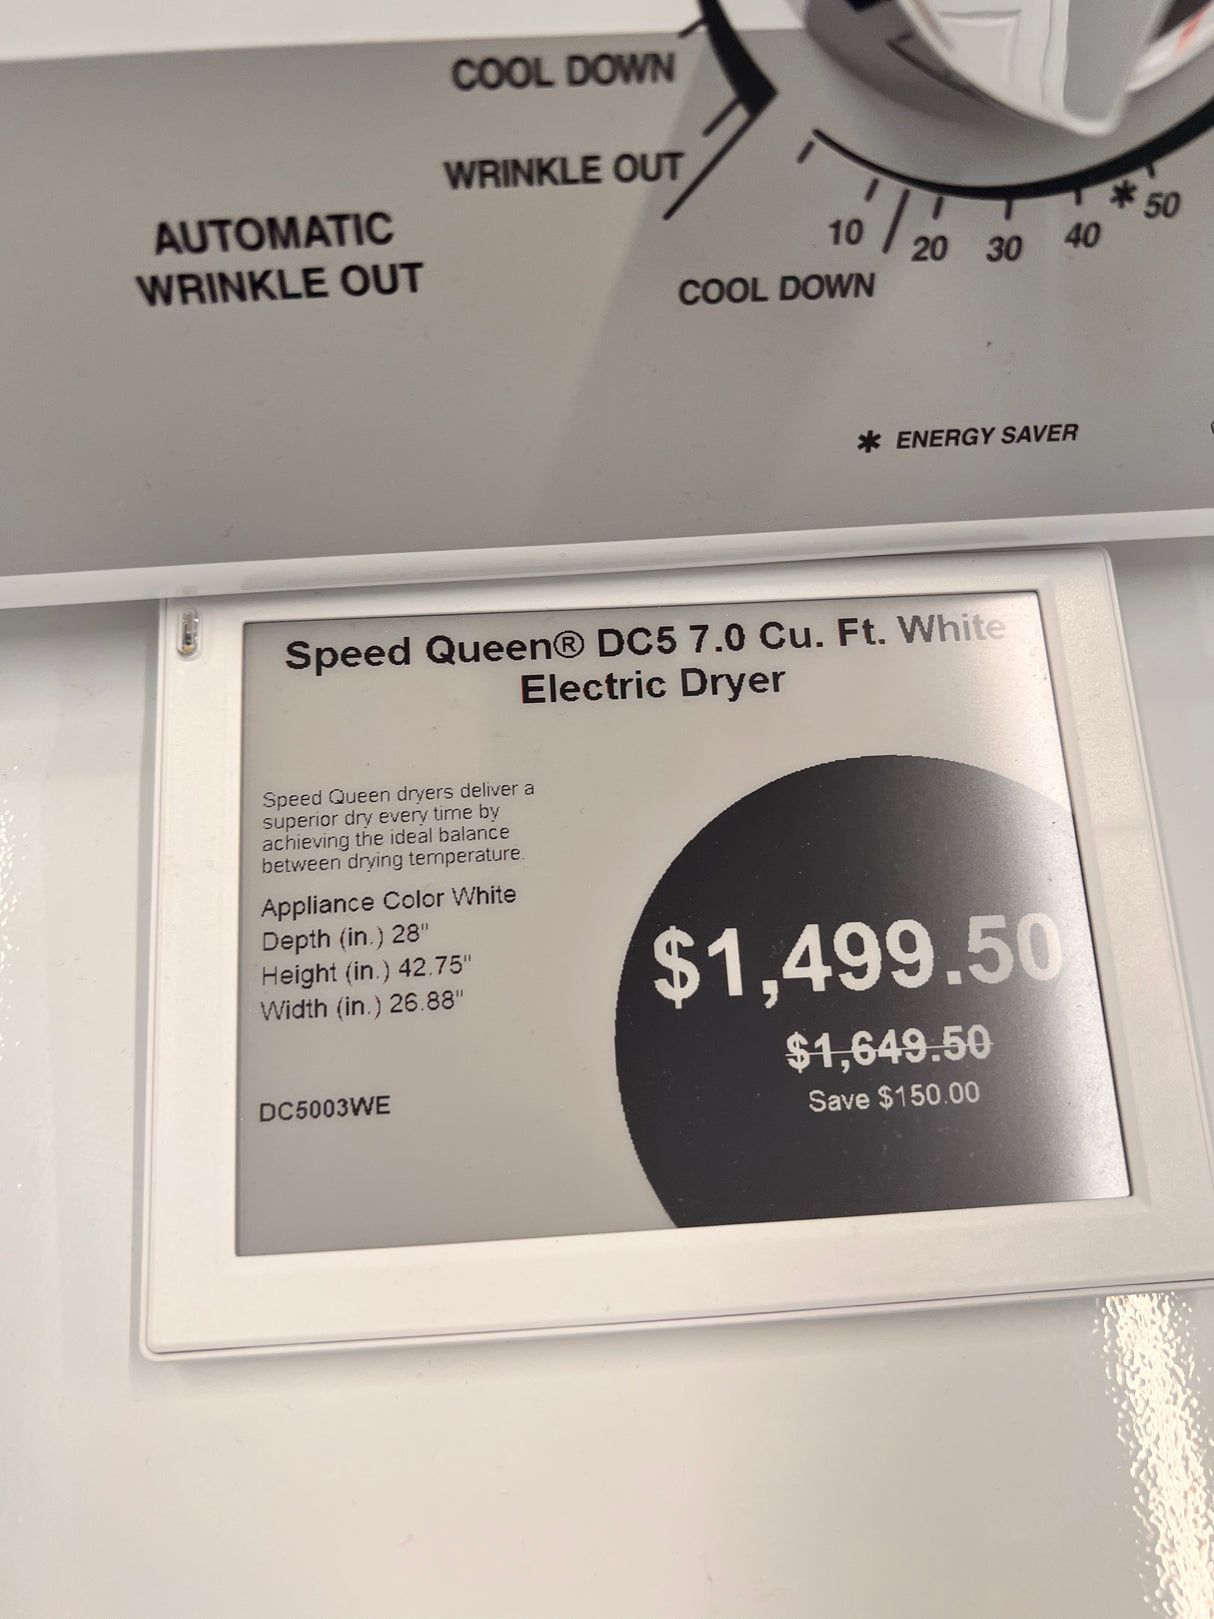 Speed queen DC5 7.0 ft.³ white electric dryer. DC5003WE.